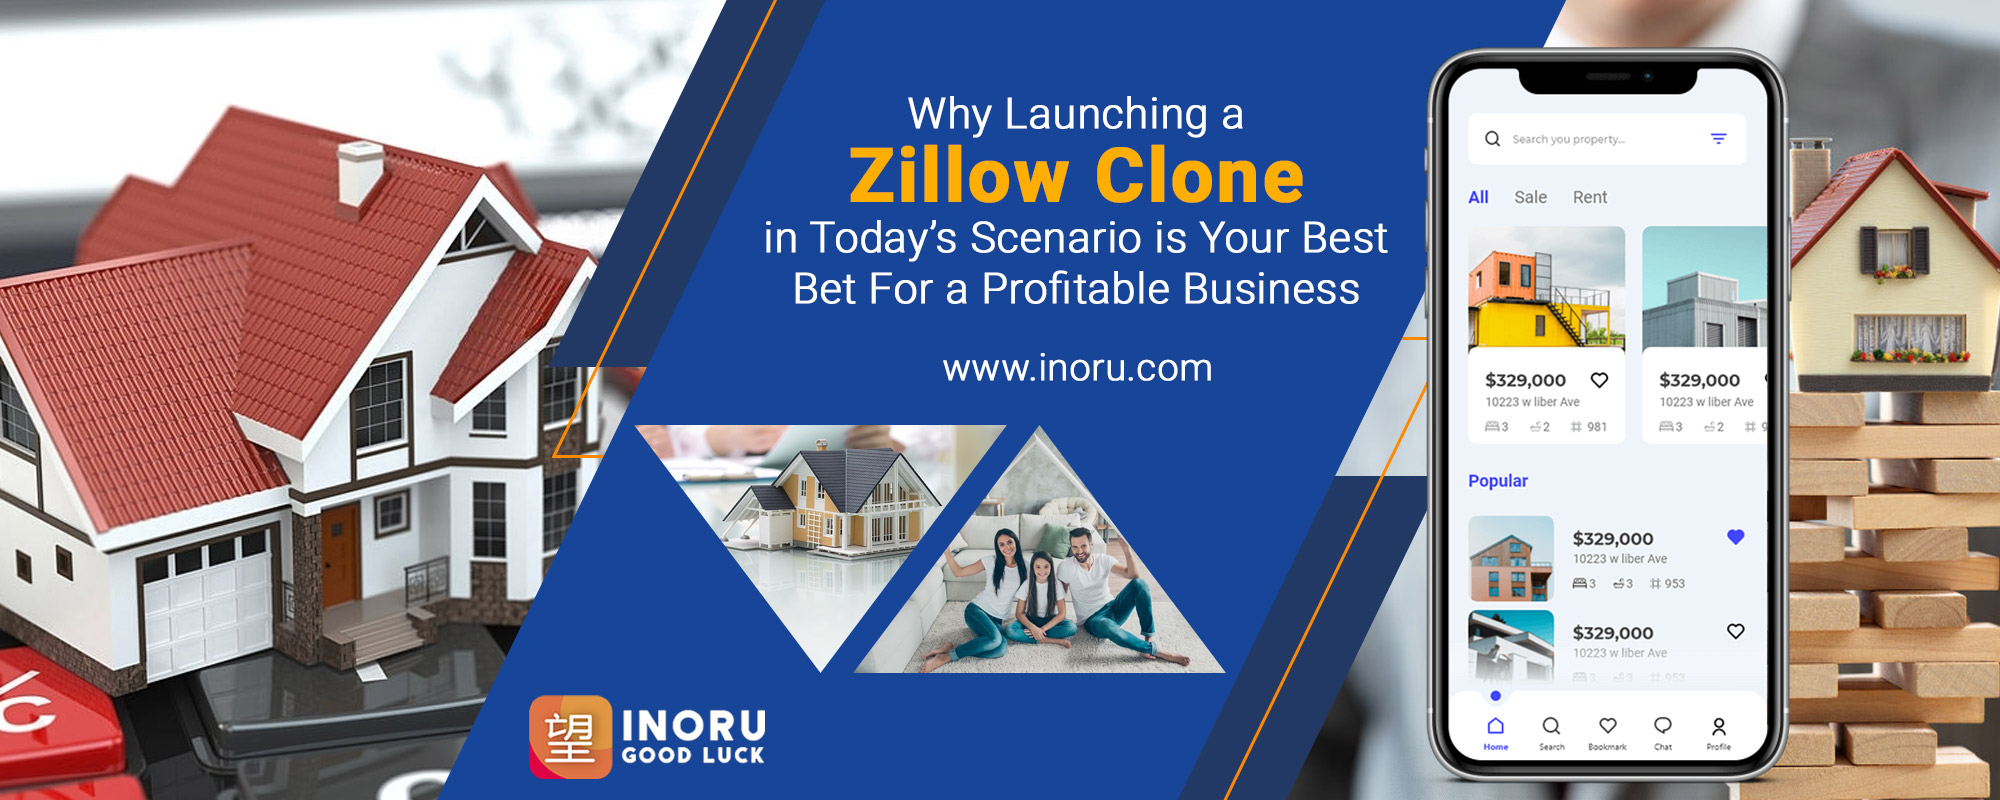 Zillow Clone